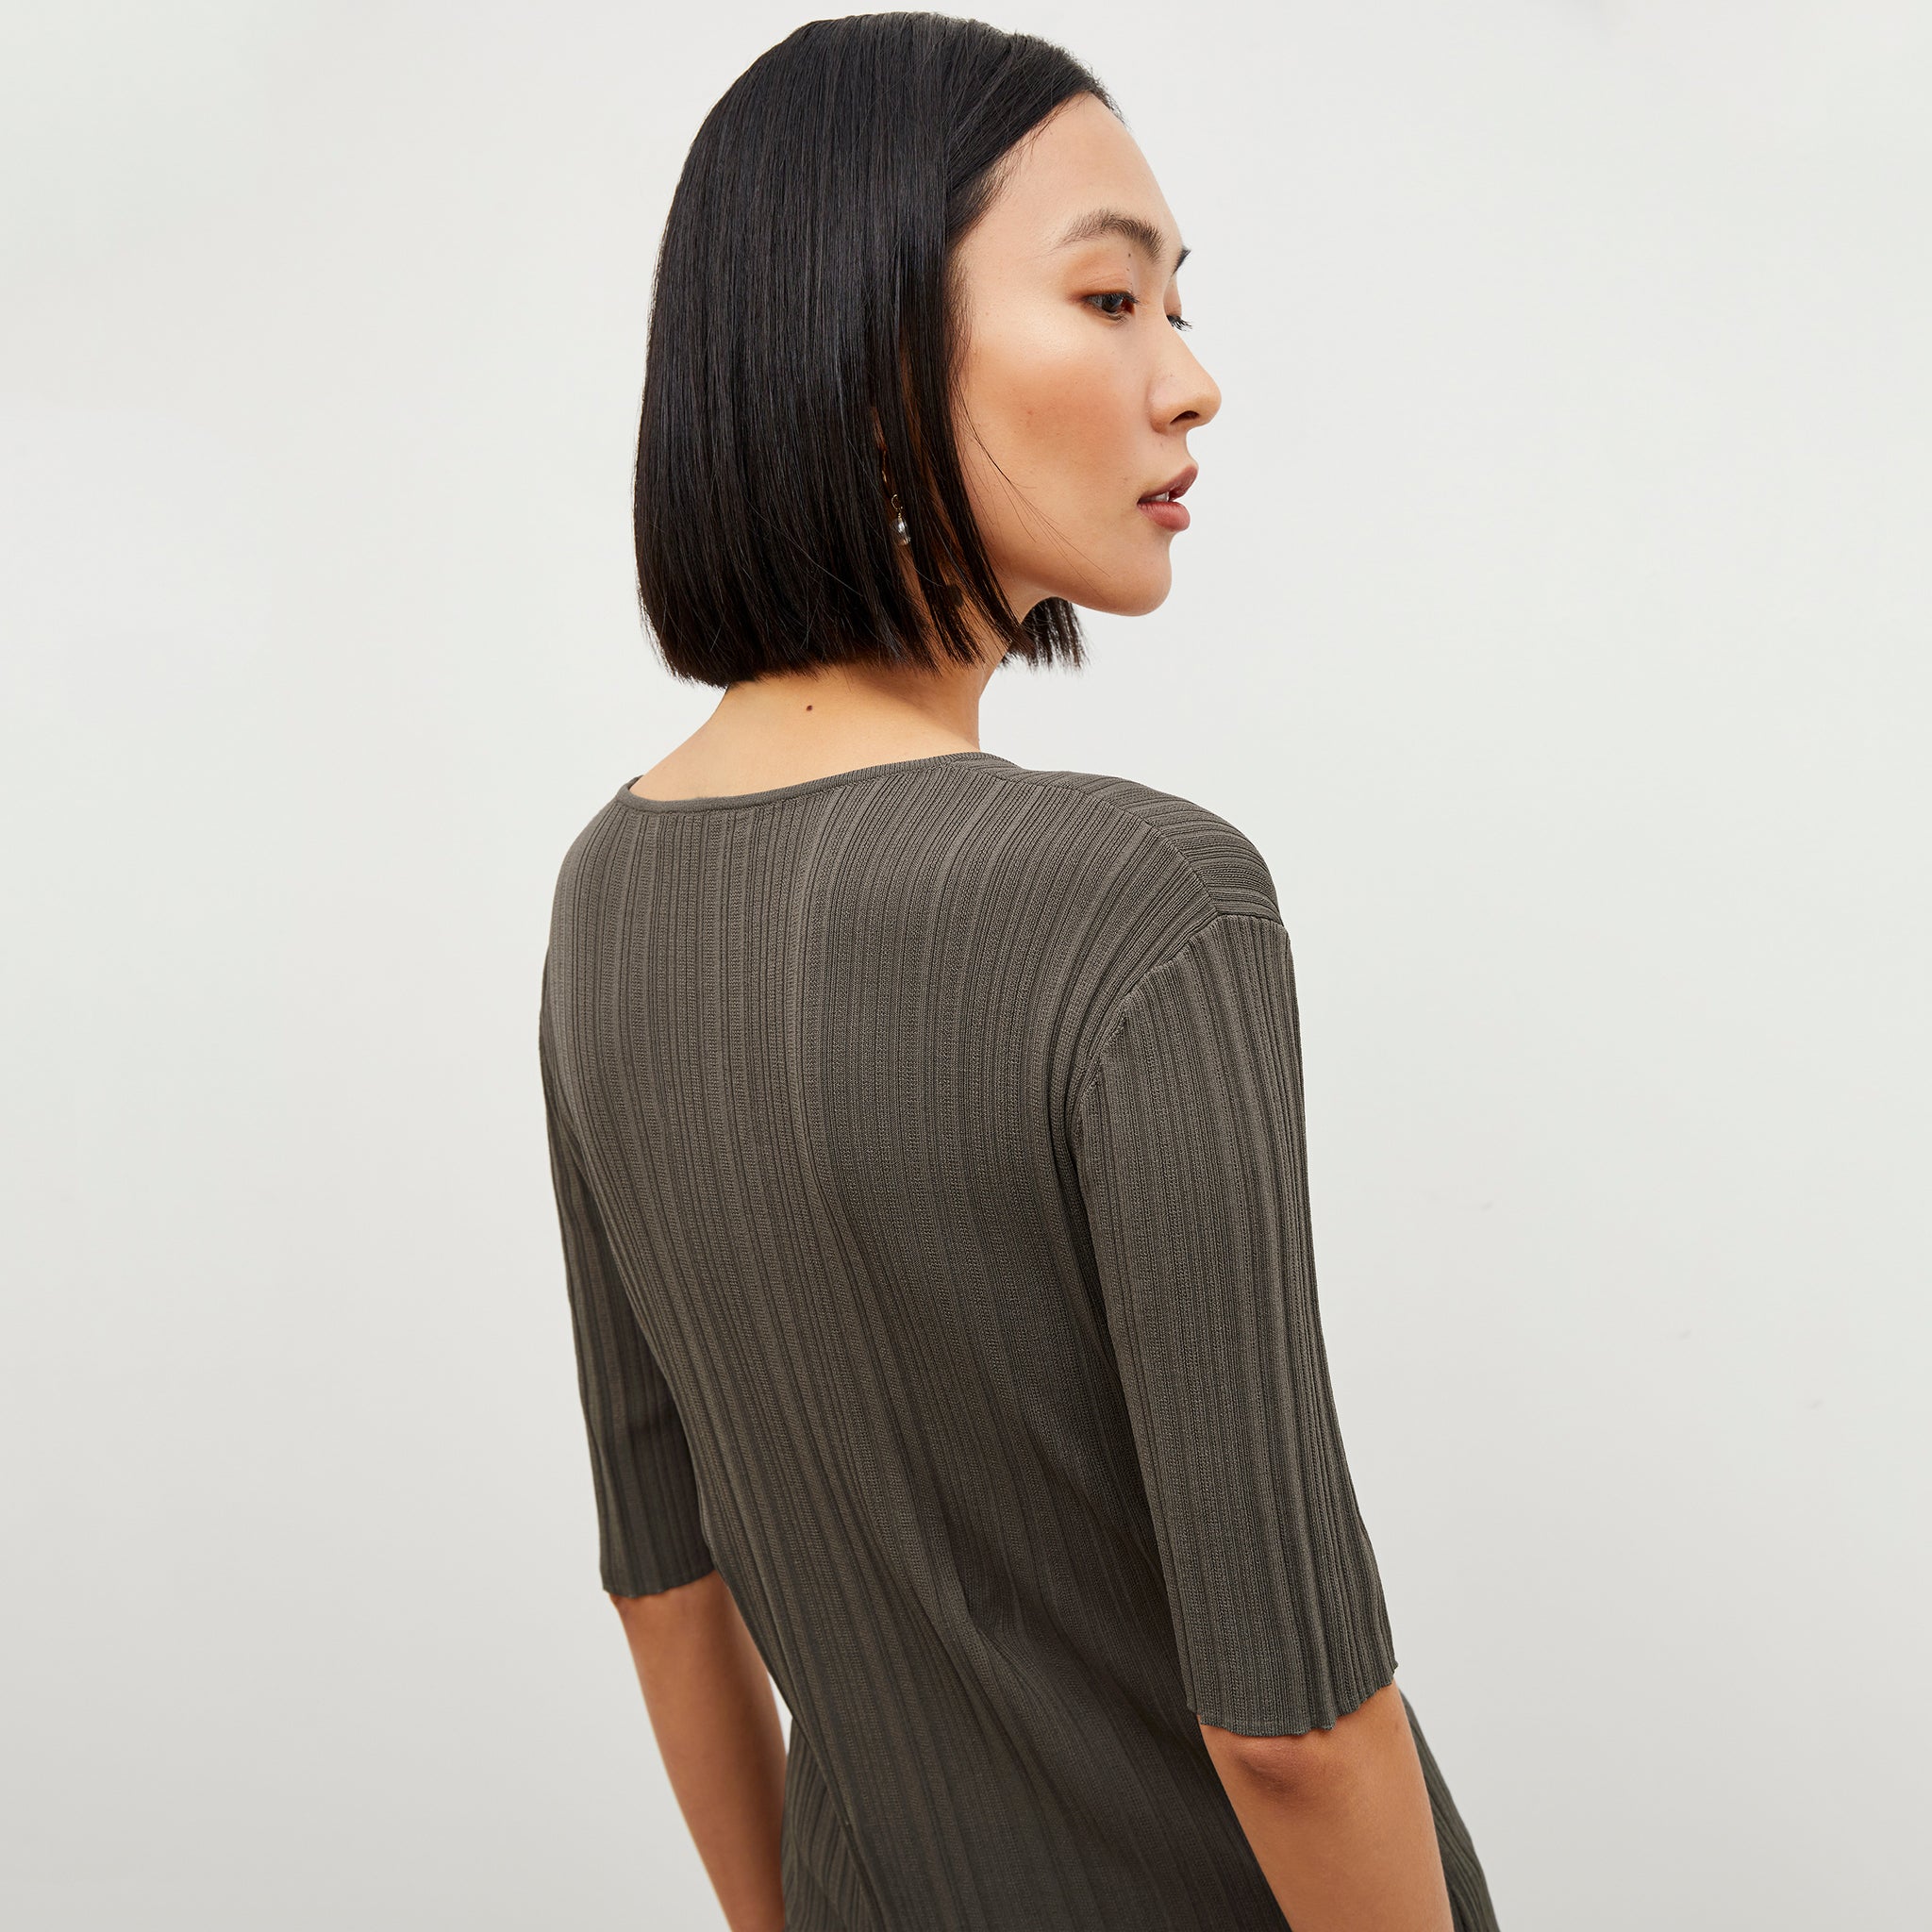 Back image of a woman wearing the Charli Top - Textured Knit in Light Ash